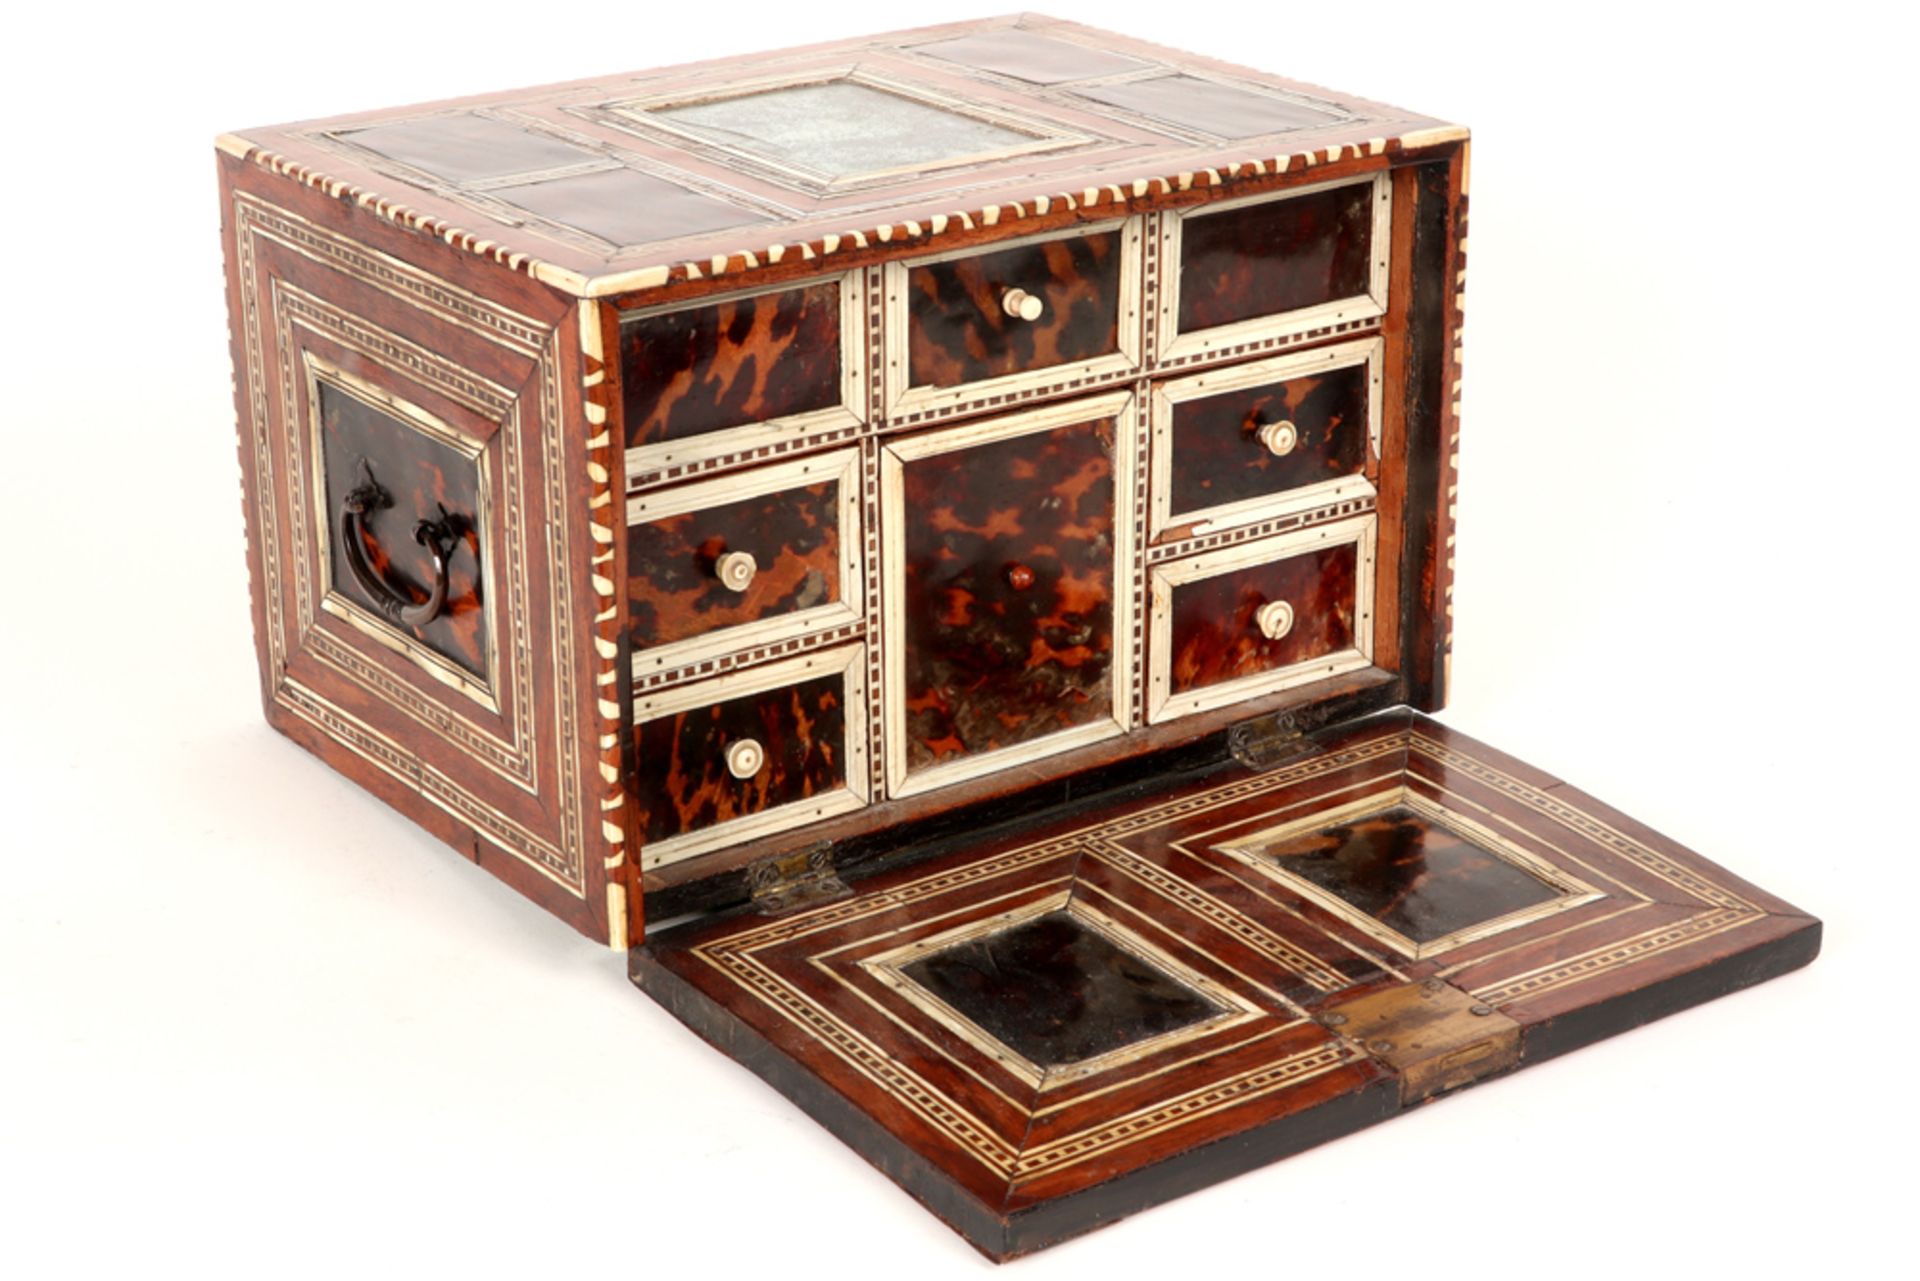 17th Cent. Indo-Portuguese table cabinet in rose-wood, ivory and tortoiseshell with an original - Image 5 of 7